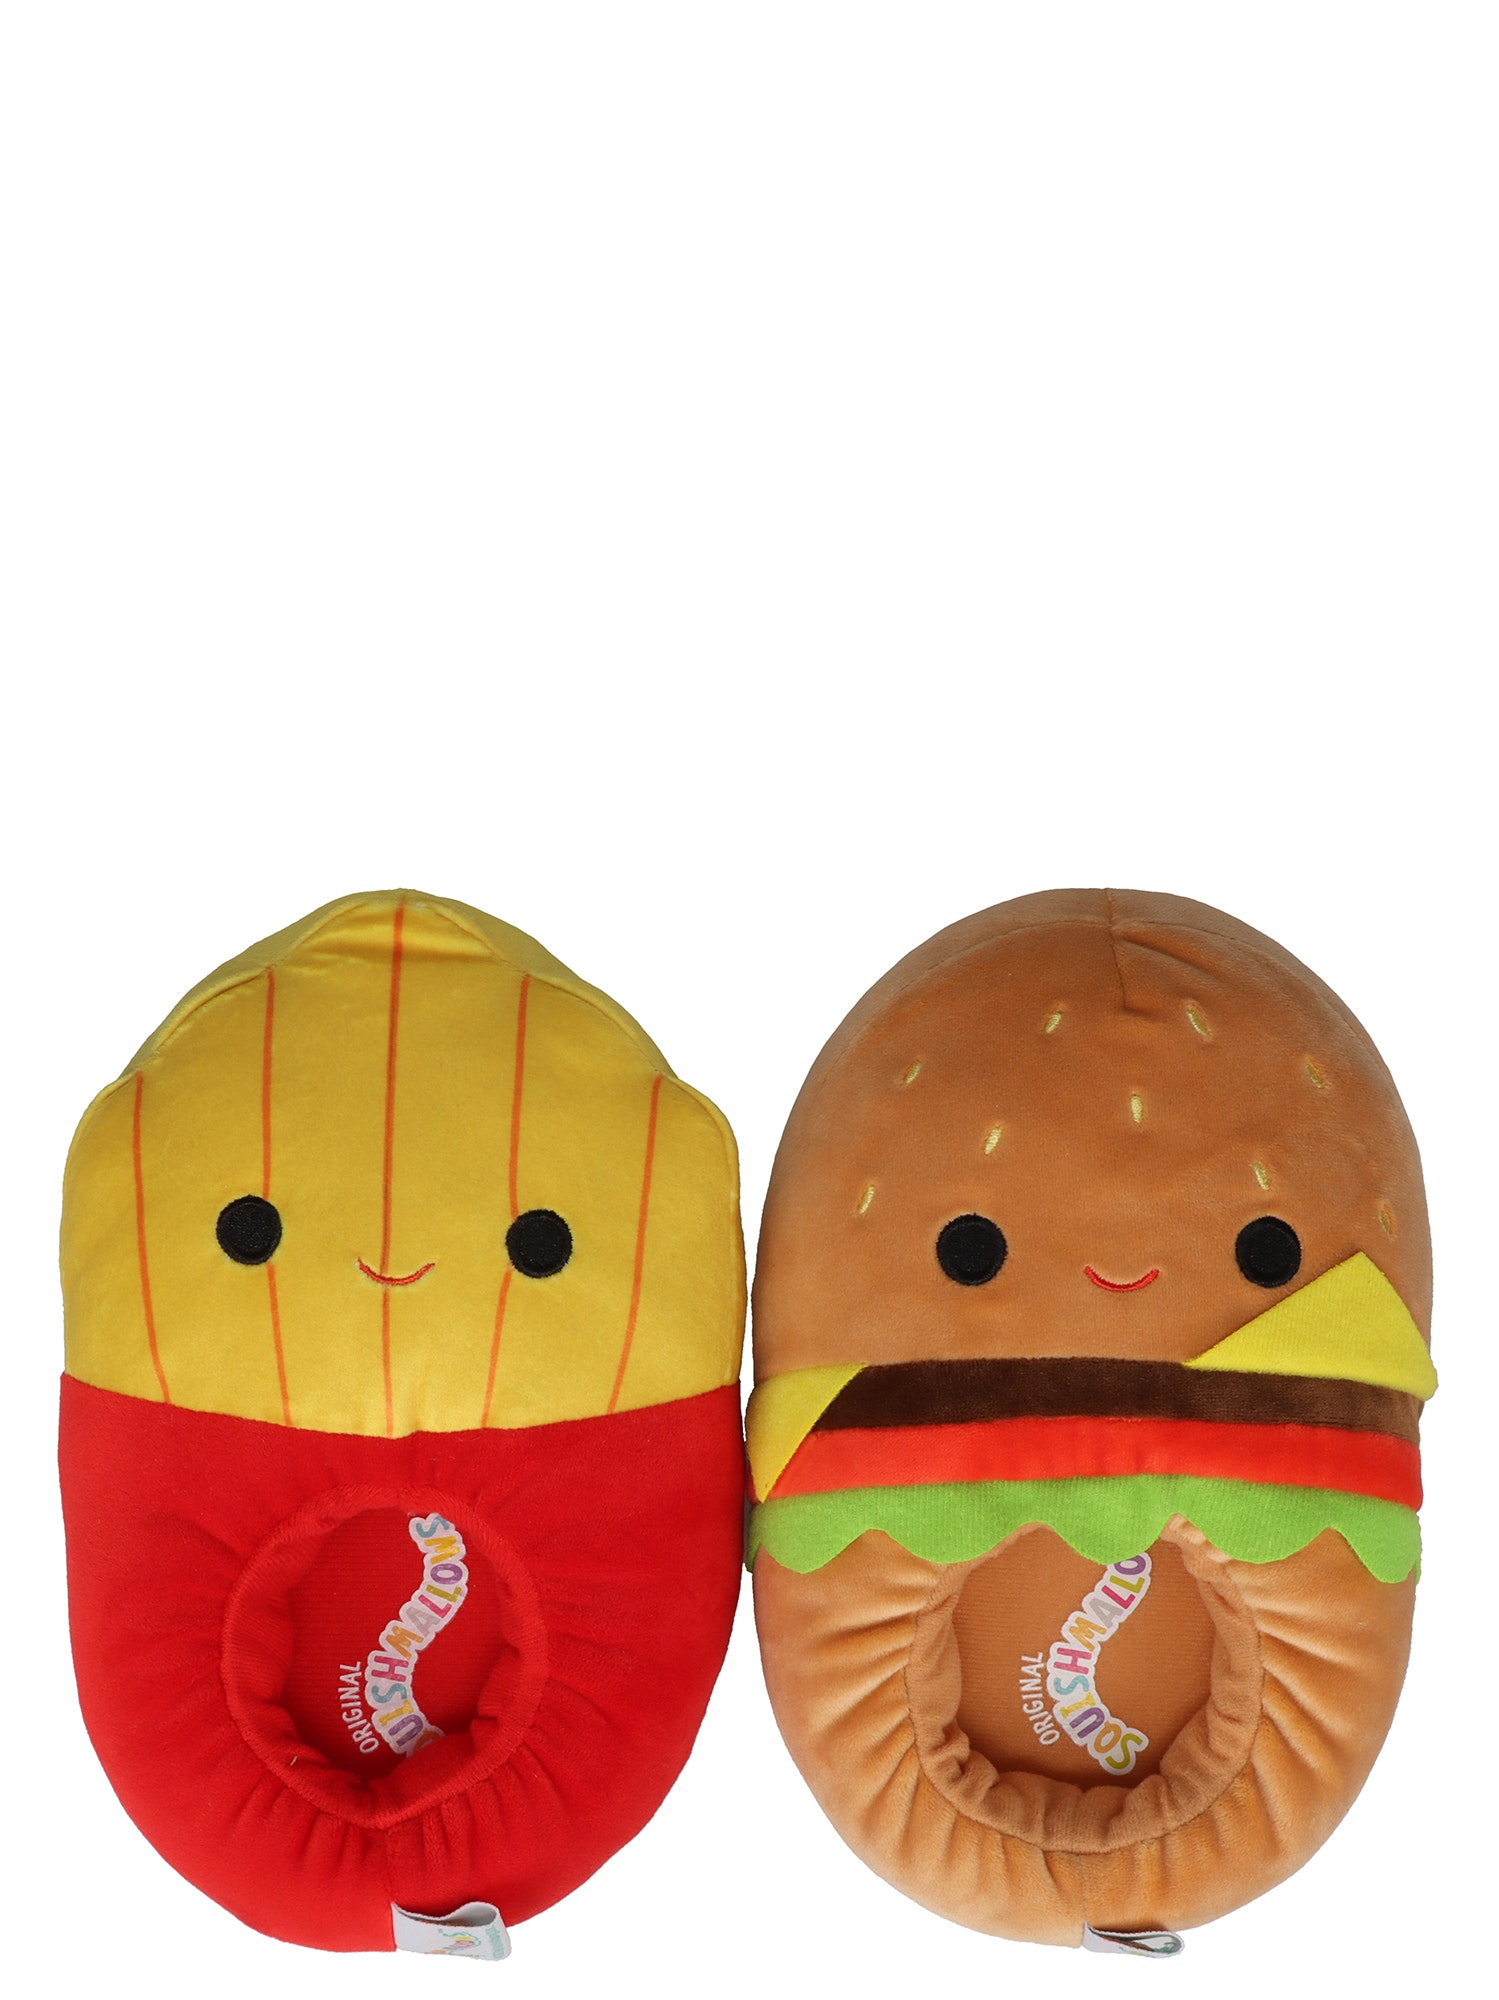 Squishmallows Kids Cheeseburger & Fries Mix Match Slippers - image 1 of 6